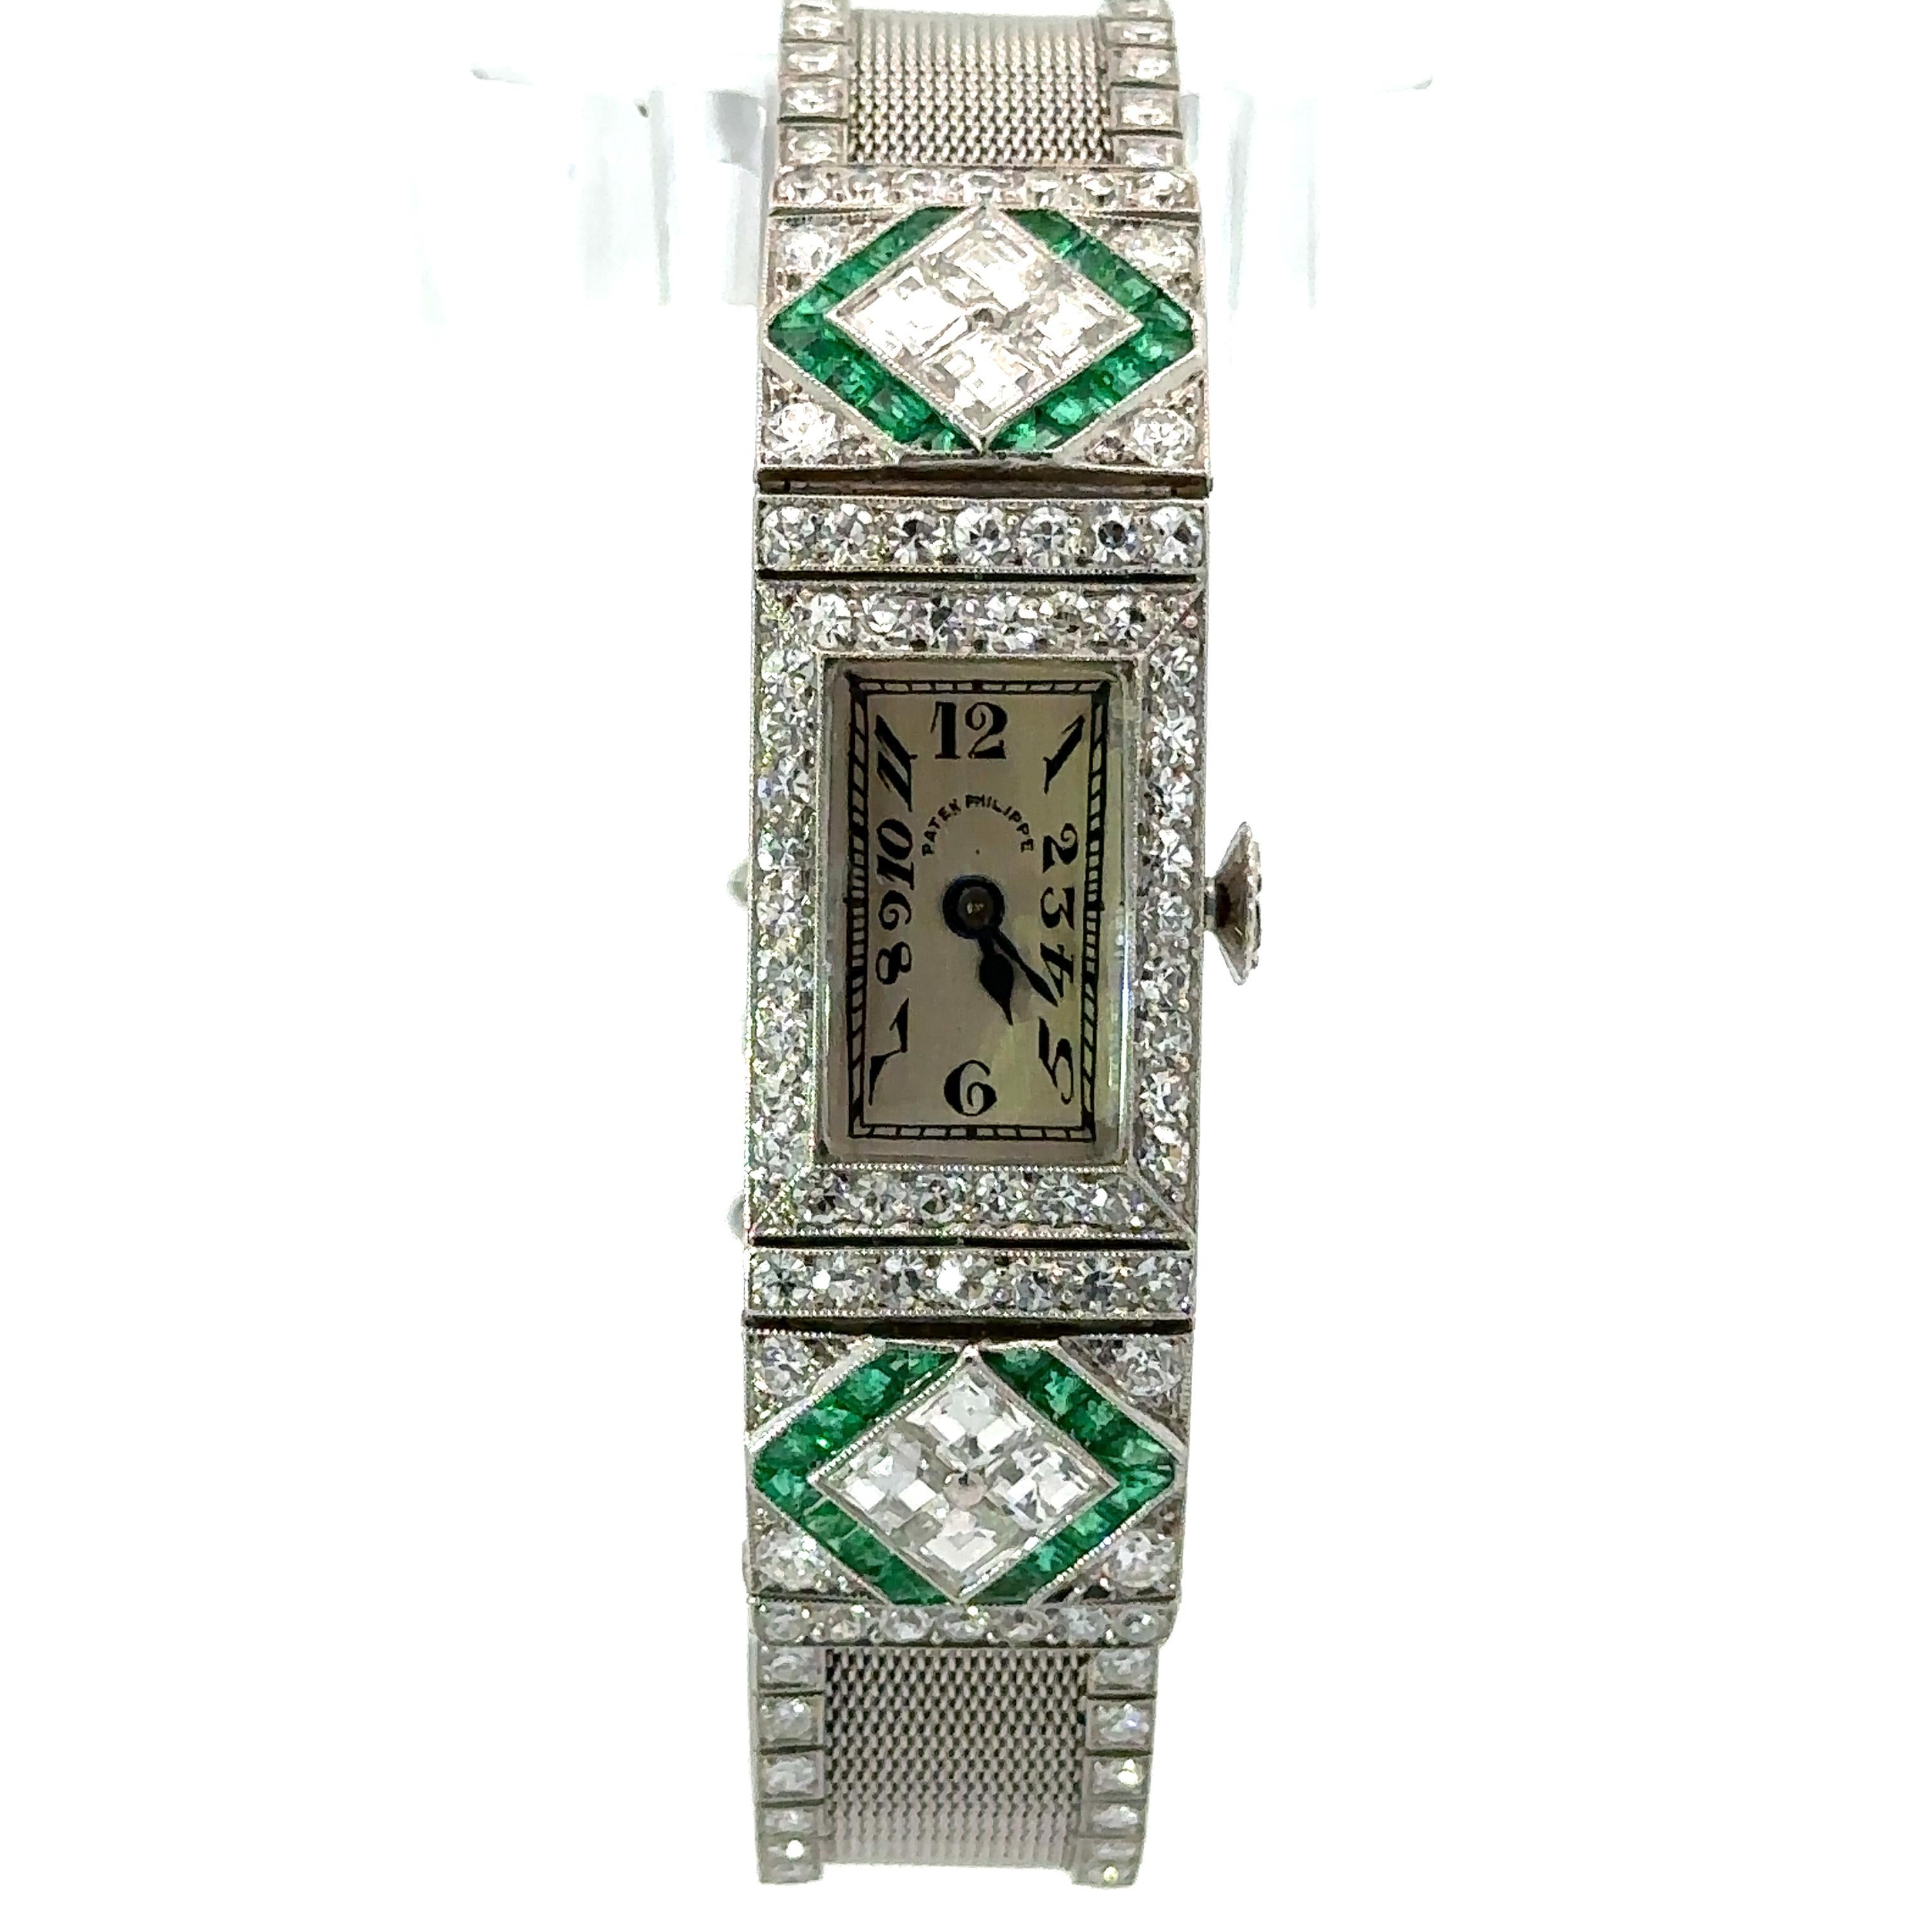 This fancy antique ladies wrist watch was crafted during the art deco period and  features a mechanical, hand winding, Swiss movement made by PATEK Philippe. Only the finest quality calibre cut natural genuine emeralds with exceptional cut, color